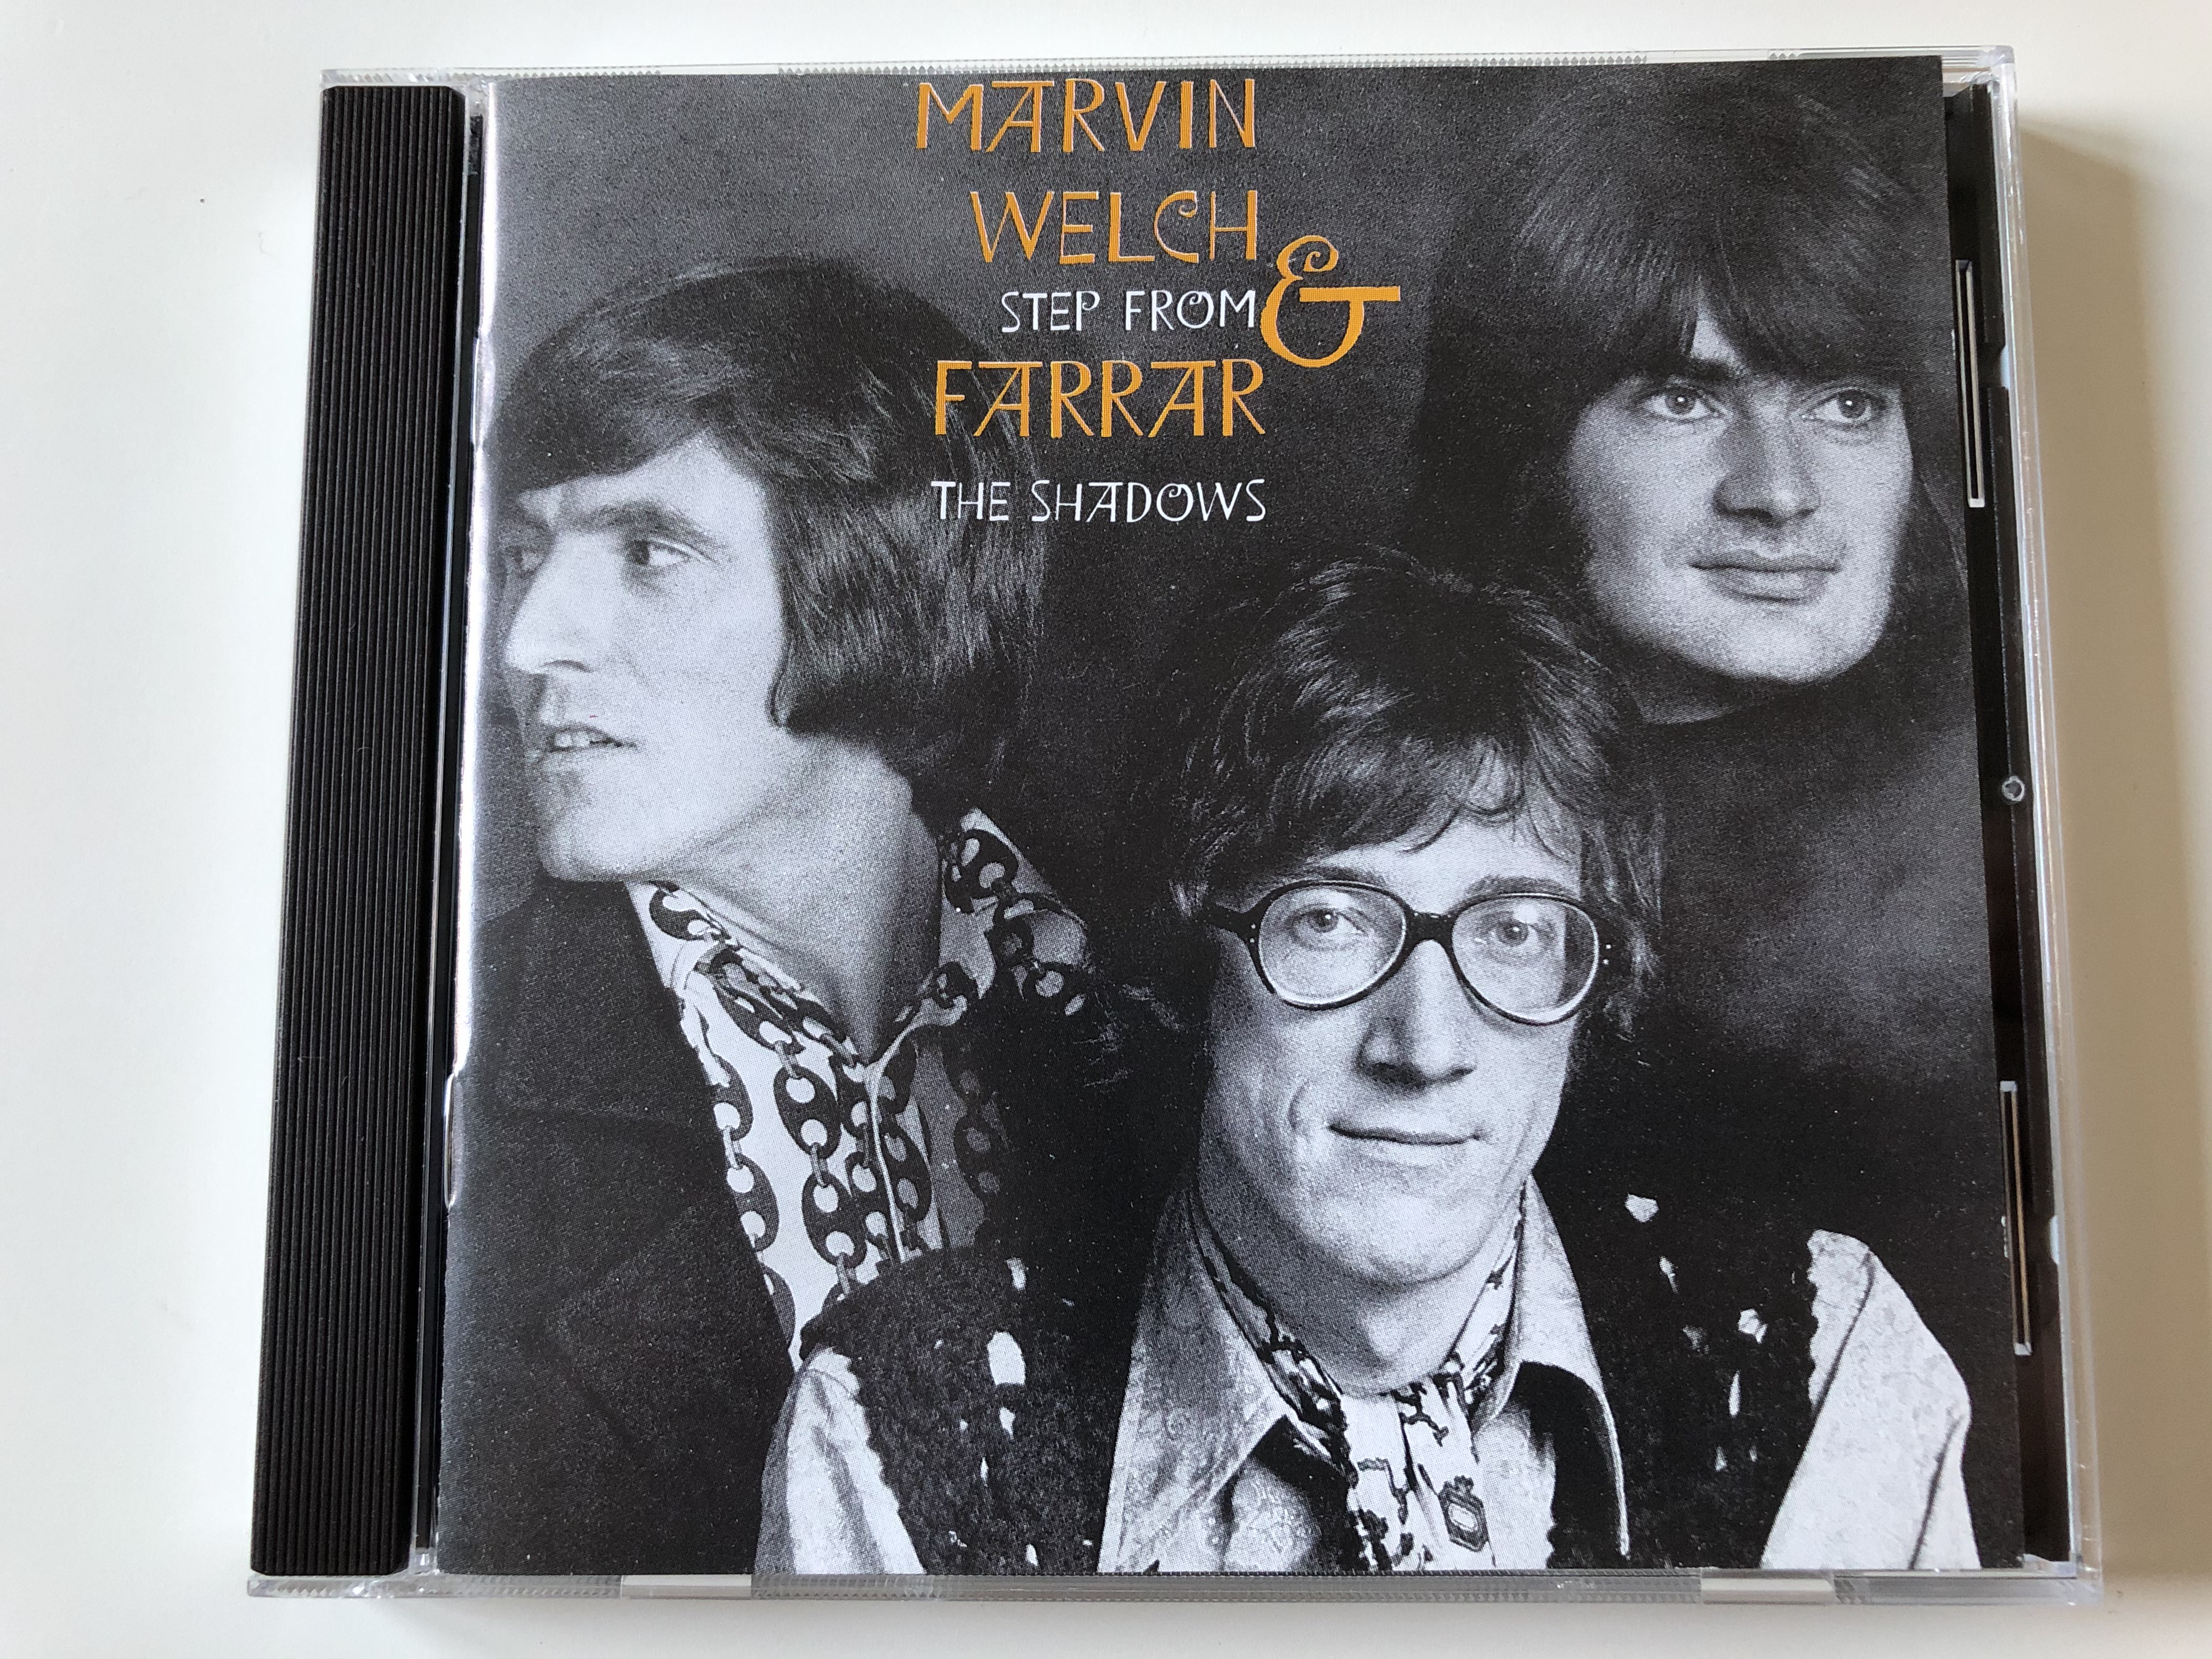 marvin-welch-farrar-step-from-the-shadows-see-for-miles-records-ltd.-audio-cd-1989-see-cd-78-1-.jpg